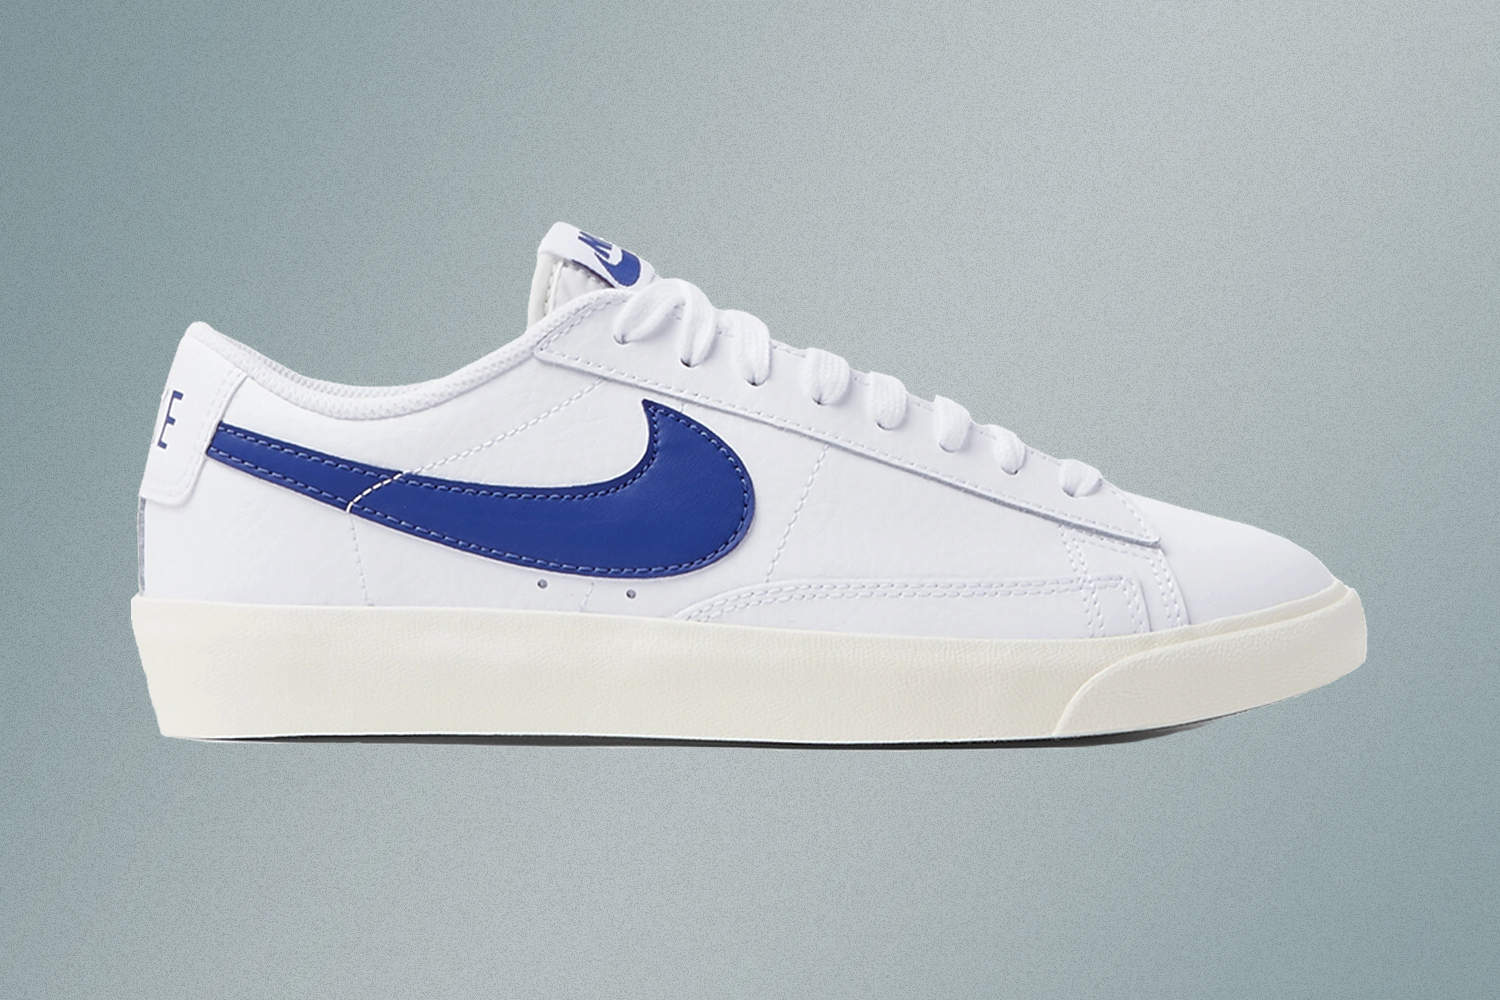 Classic Blazer Sneakers Are on Sale at Mr Porter - InsideHook